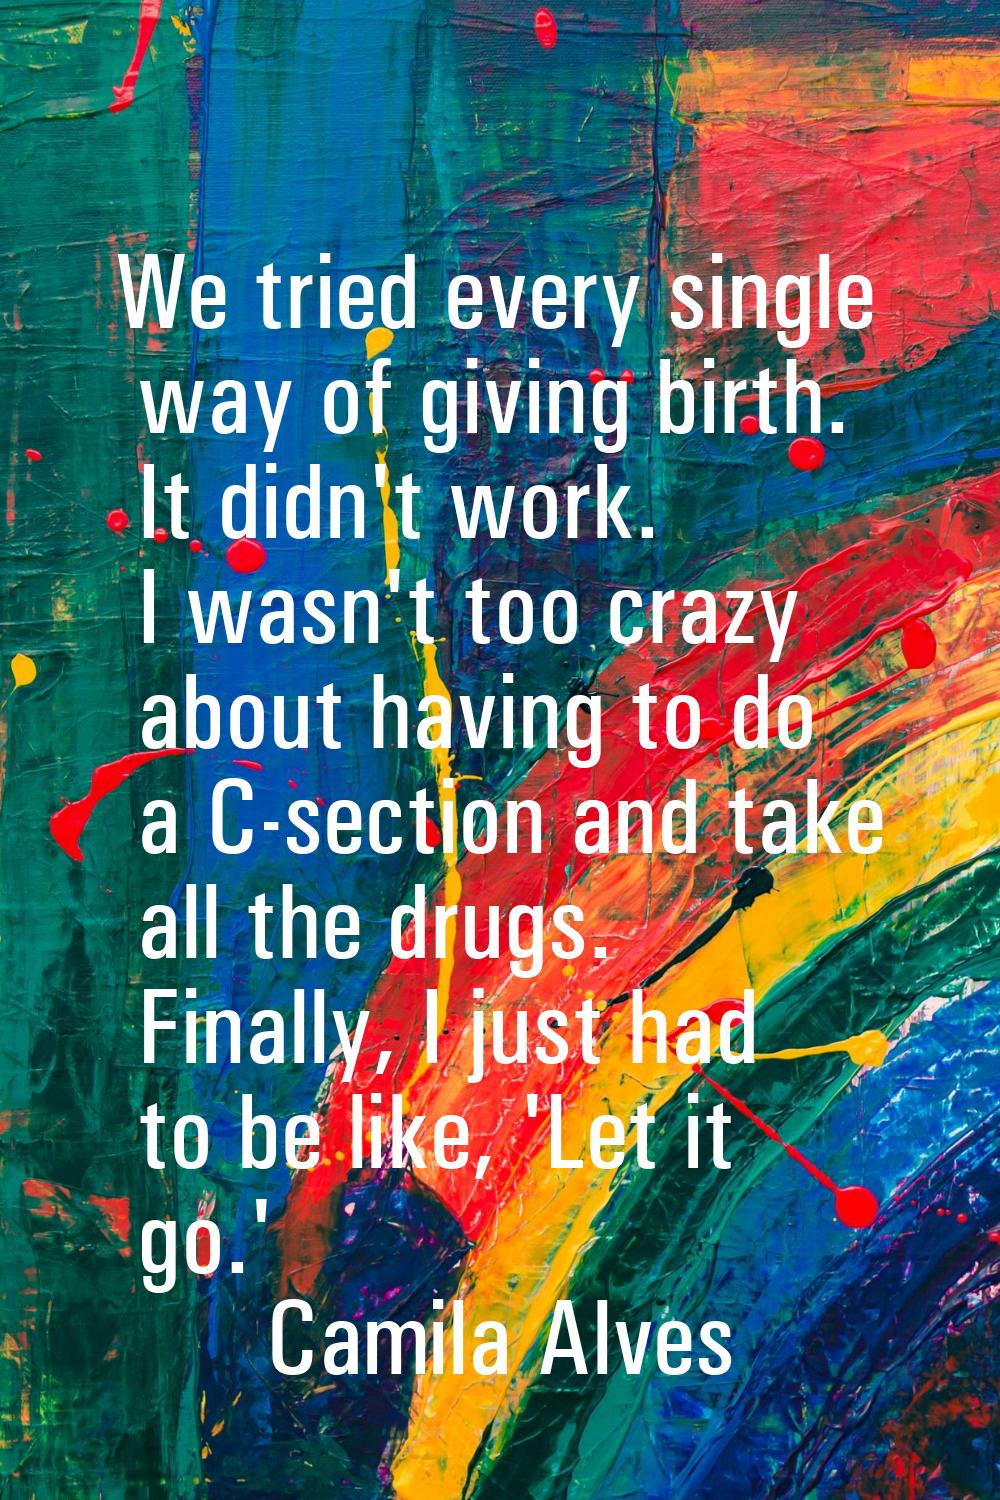 We tried every single way of giving birth. It didn't work. I wasn't too crazy about having to do a 